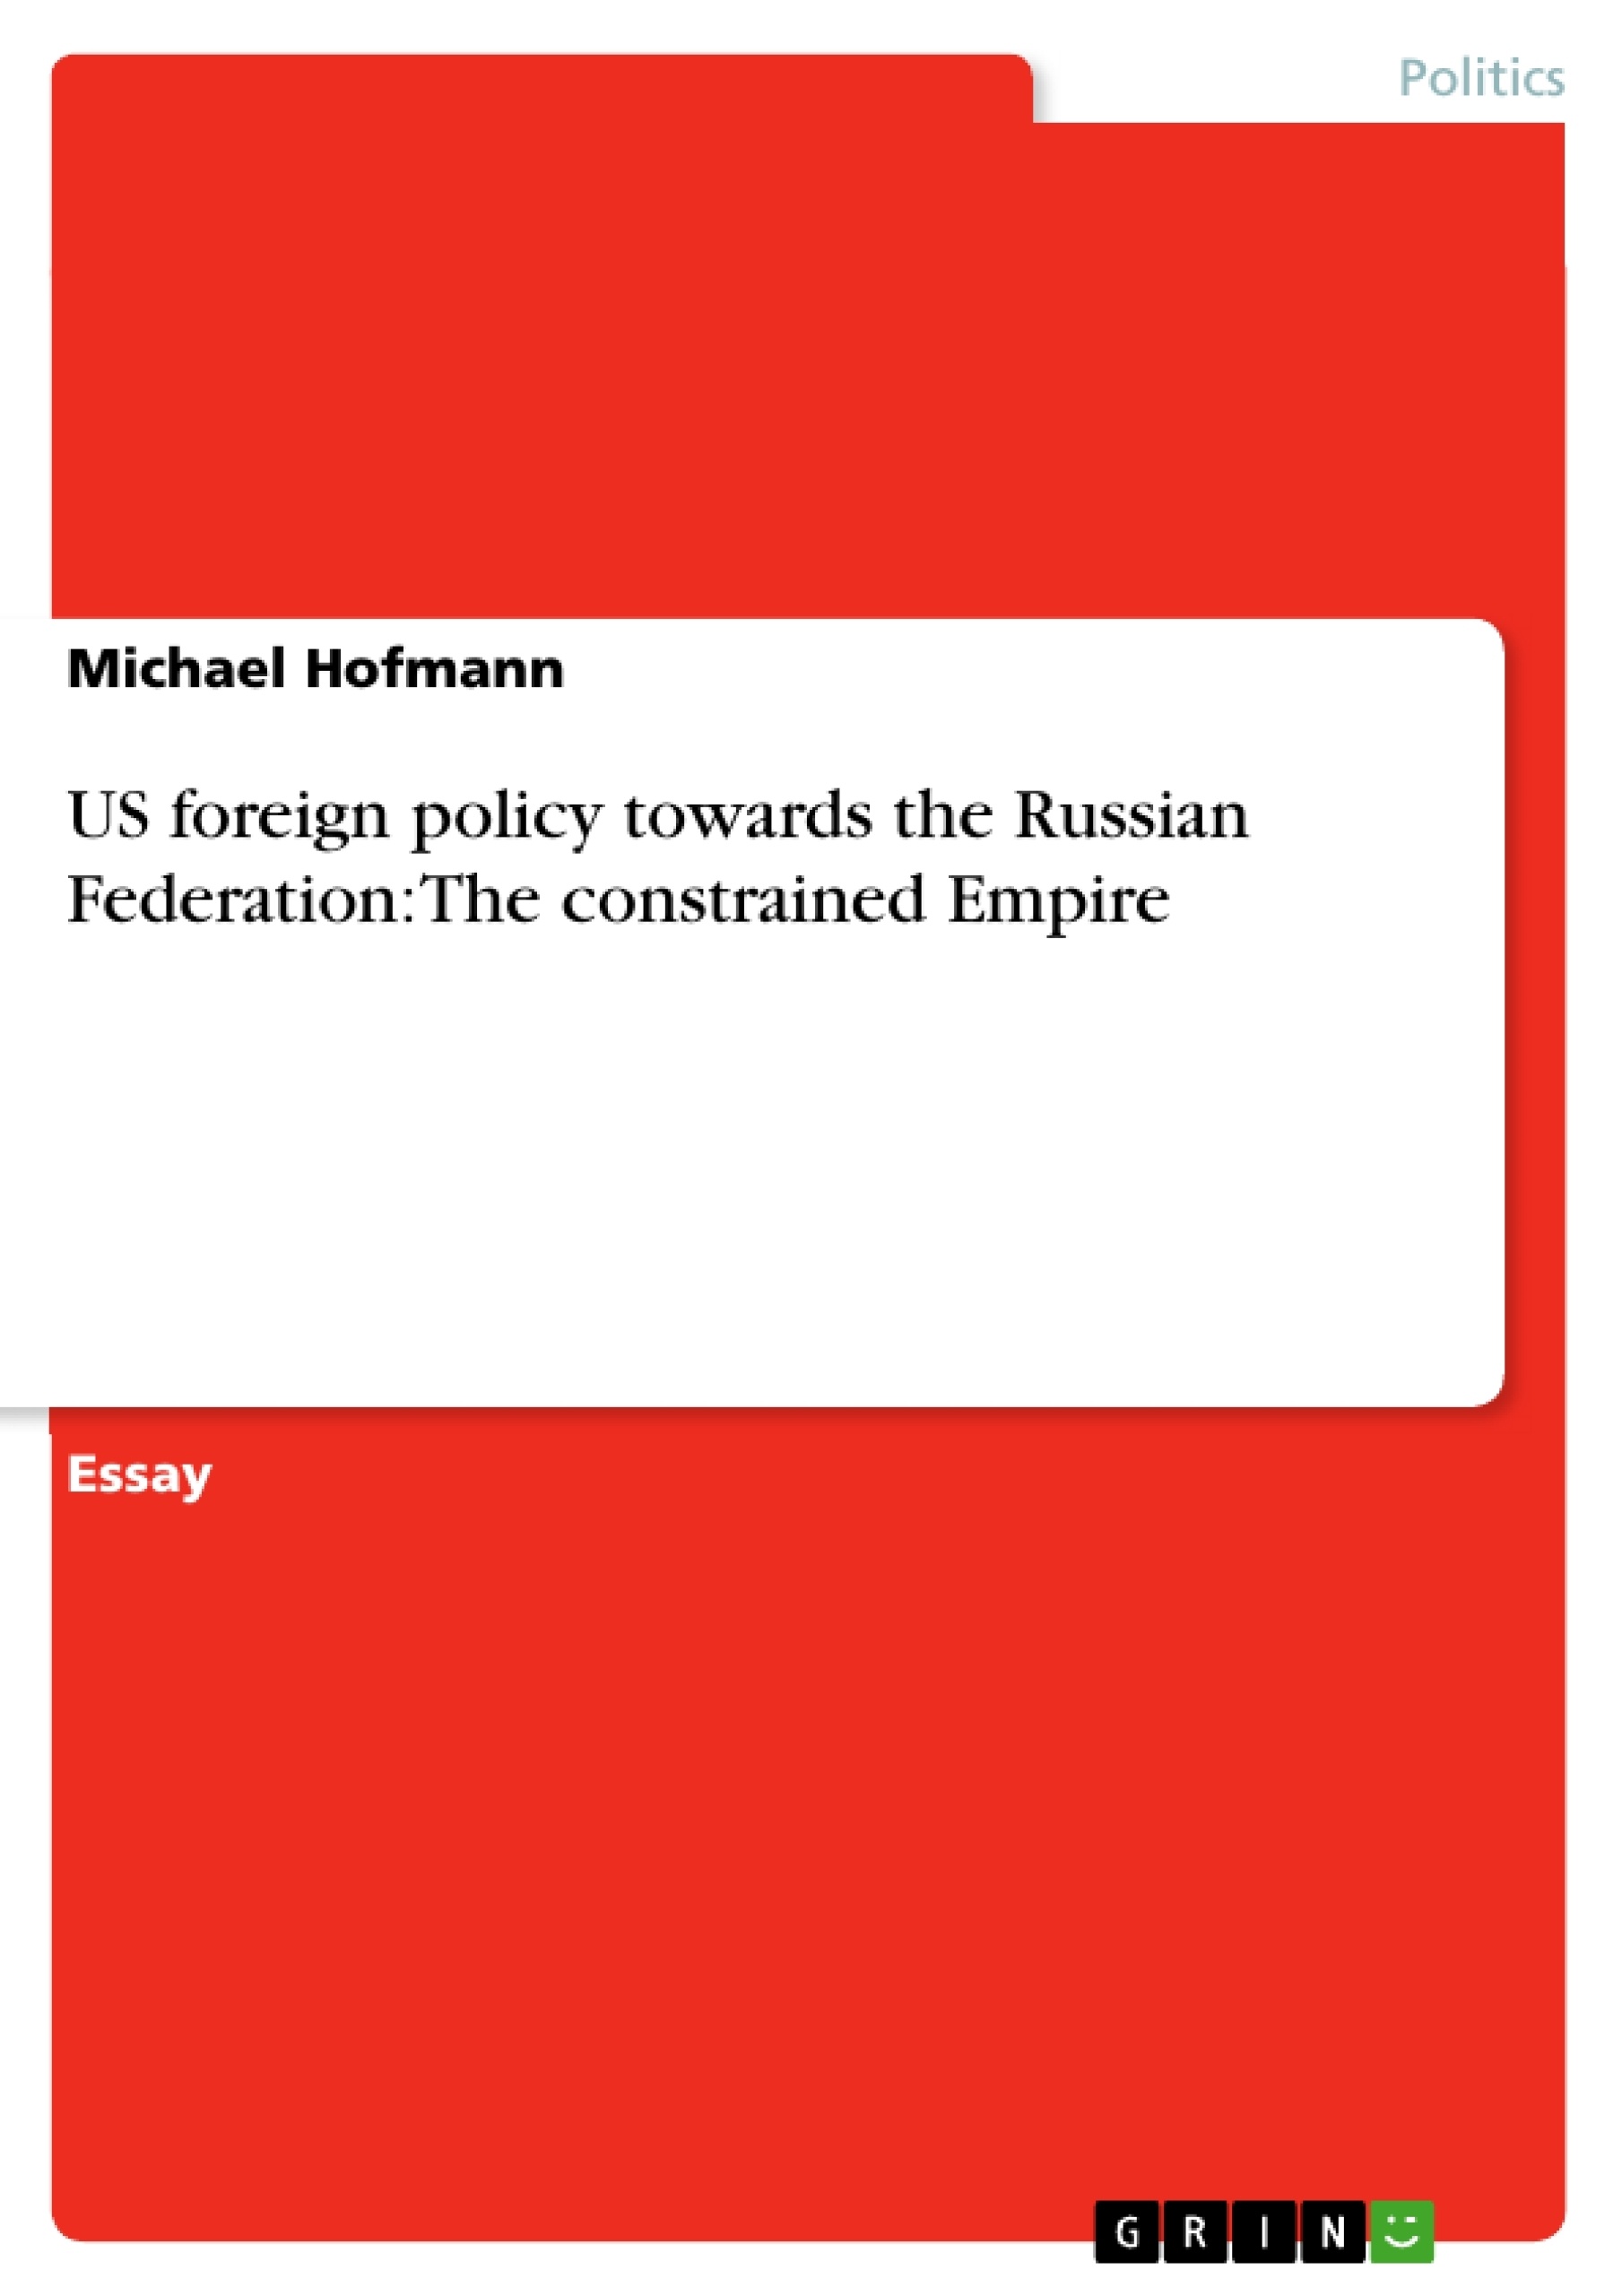 Título: US foreign policy towards the Russian Federation: The constrained Empire